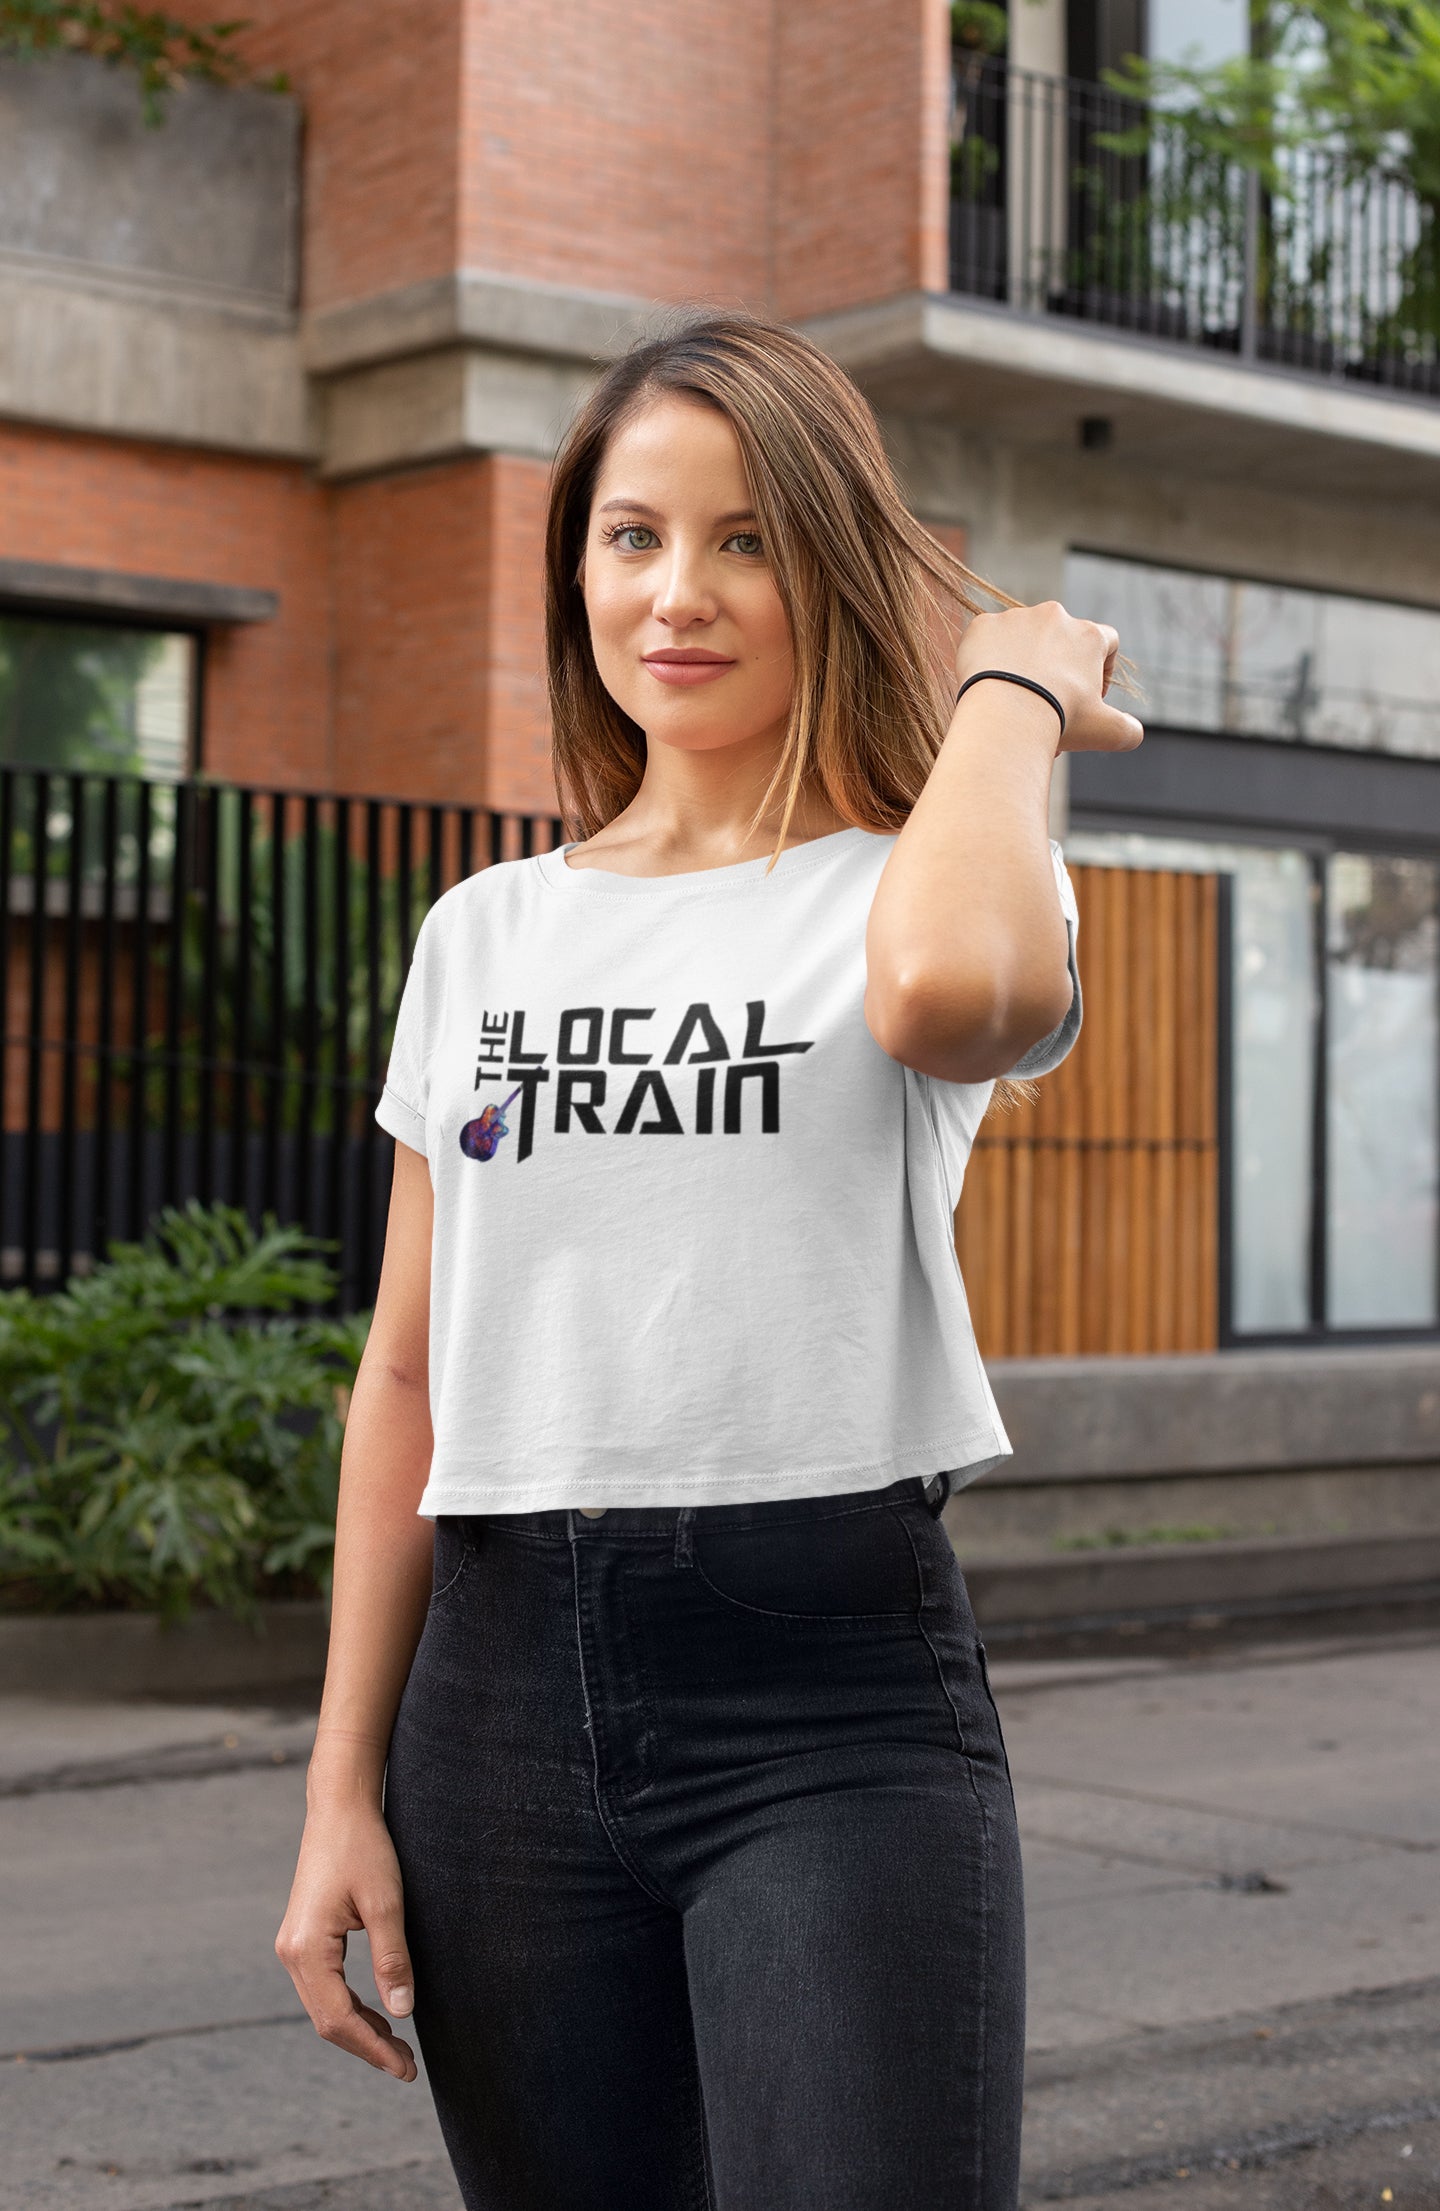 The Local Train Crop Top For Women